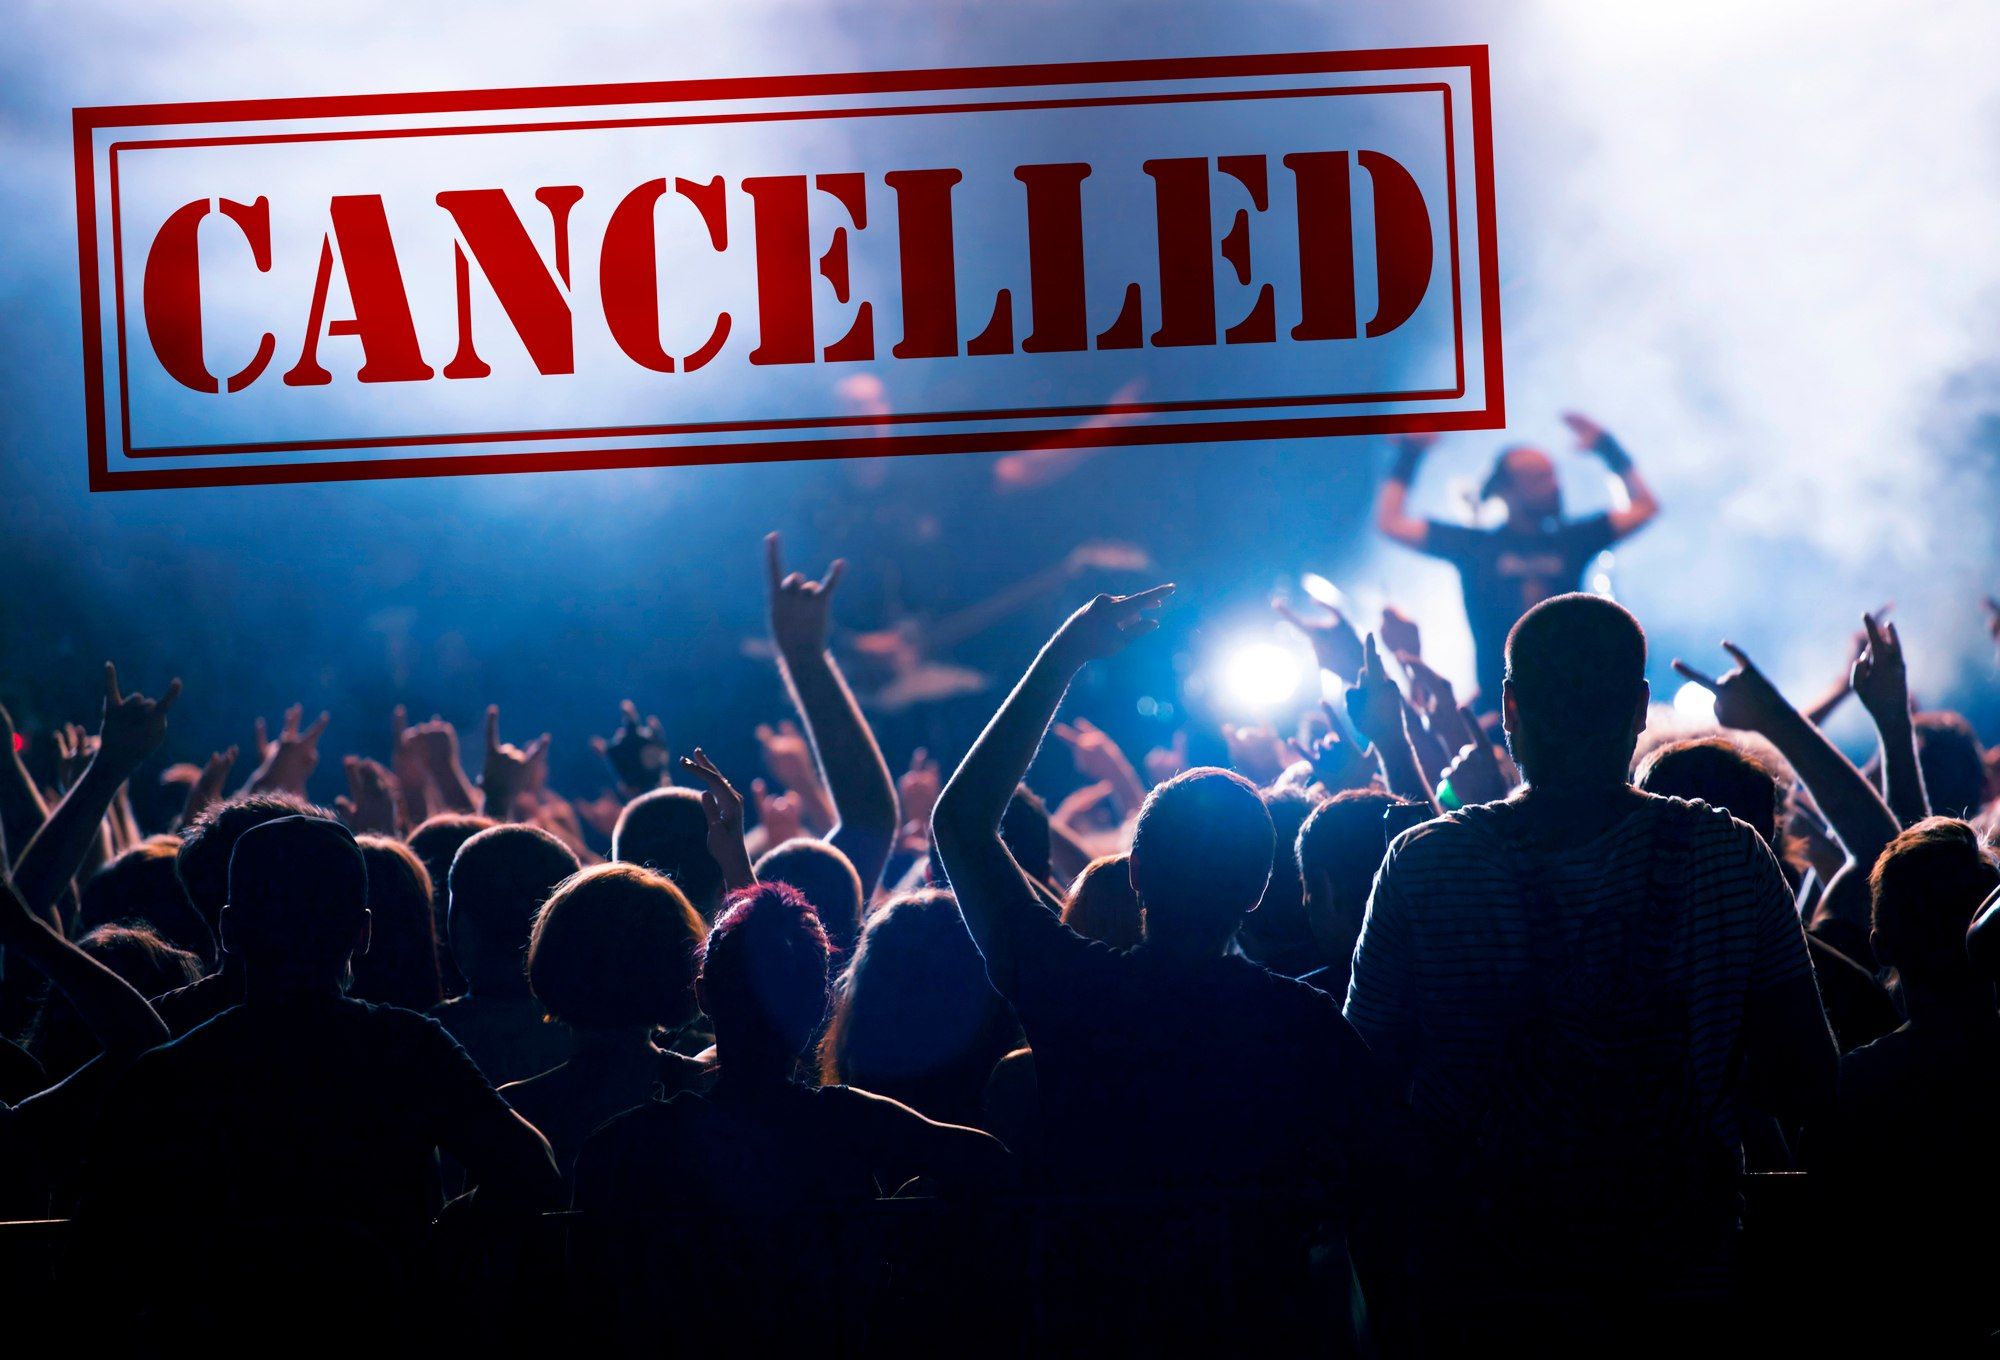 "Cancelled" stamped over a photo of a crowd at a concert - vivid seats class action - event cancellation